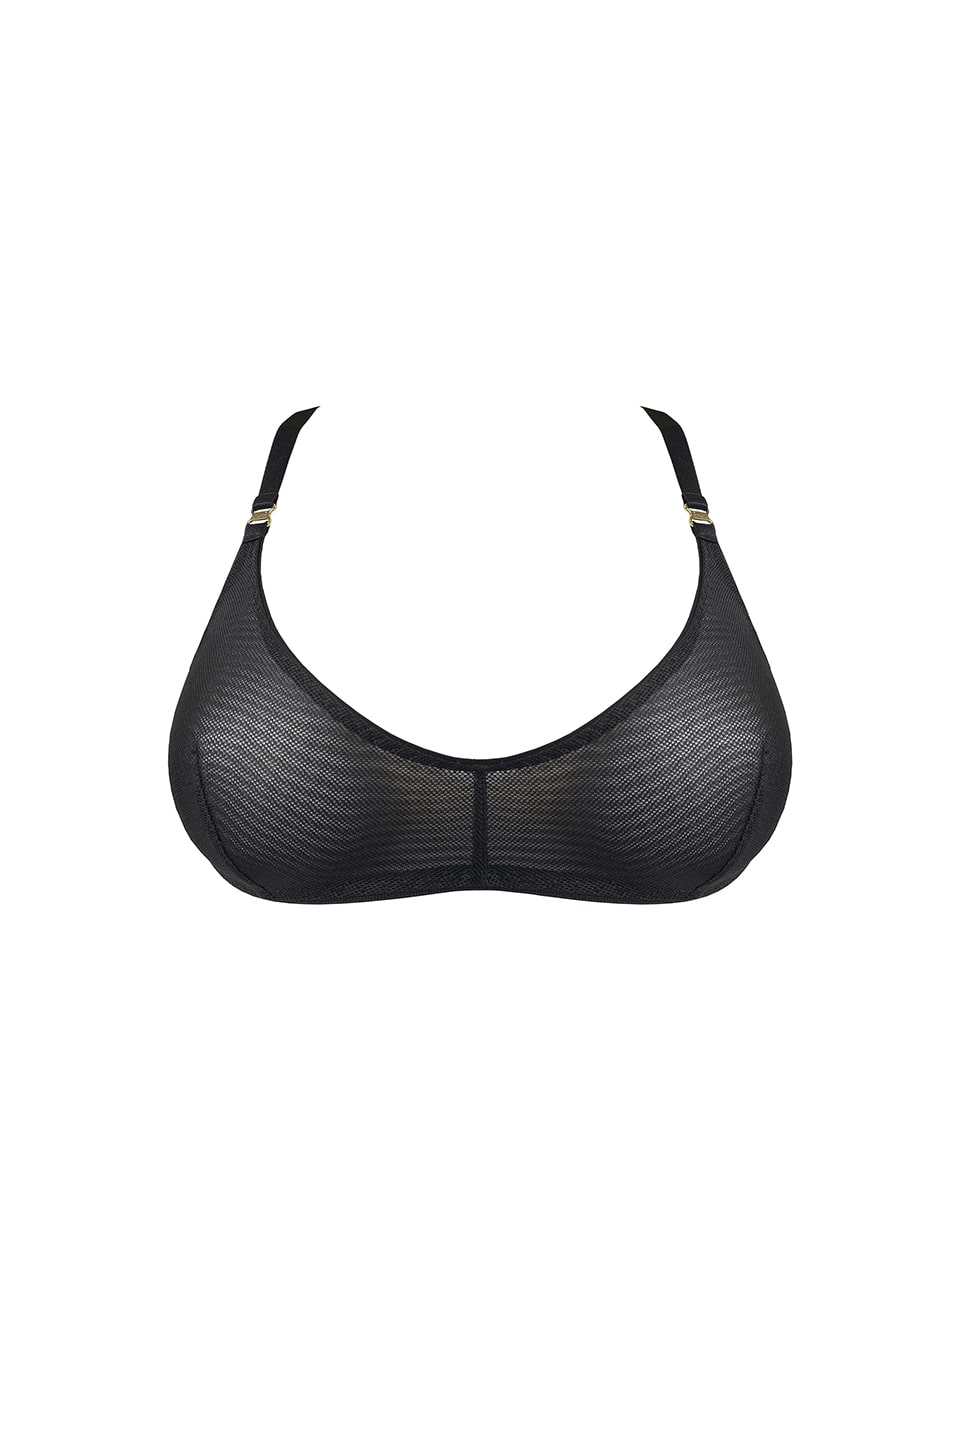 Thumbnail for Product gallery 1, Cadi Soft Cup Bra Black